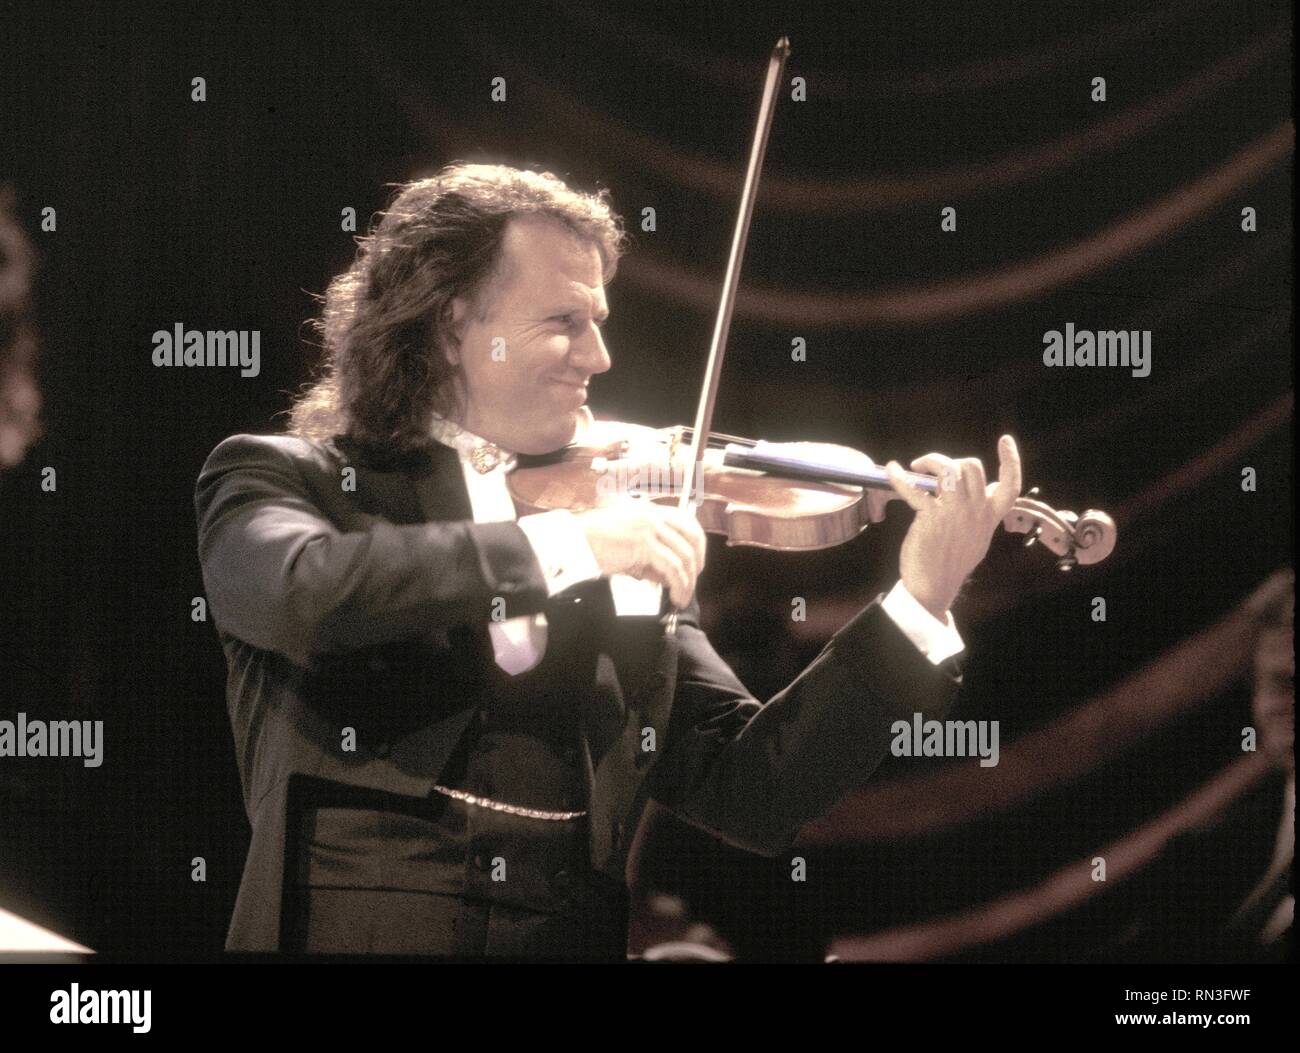 Dutch violinist, conductor, and composer André Rieu is shown performing on stage during a 'live' concert appearance. Stock Photo